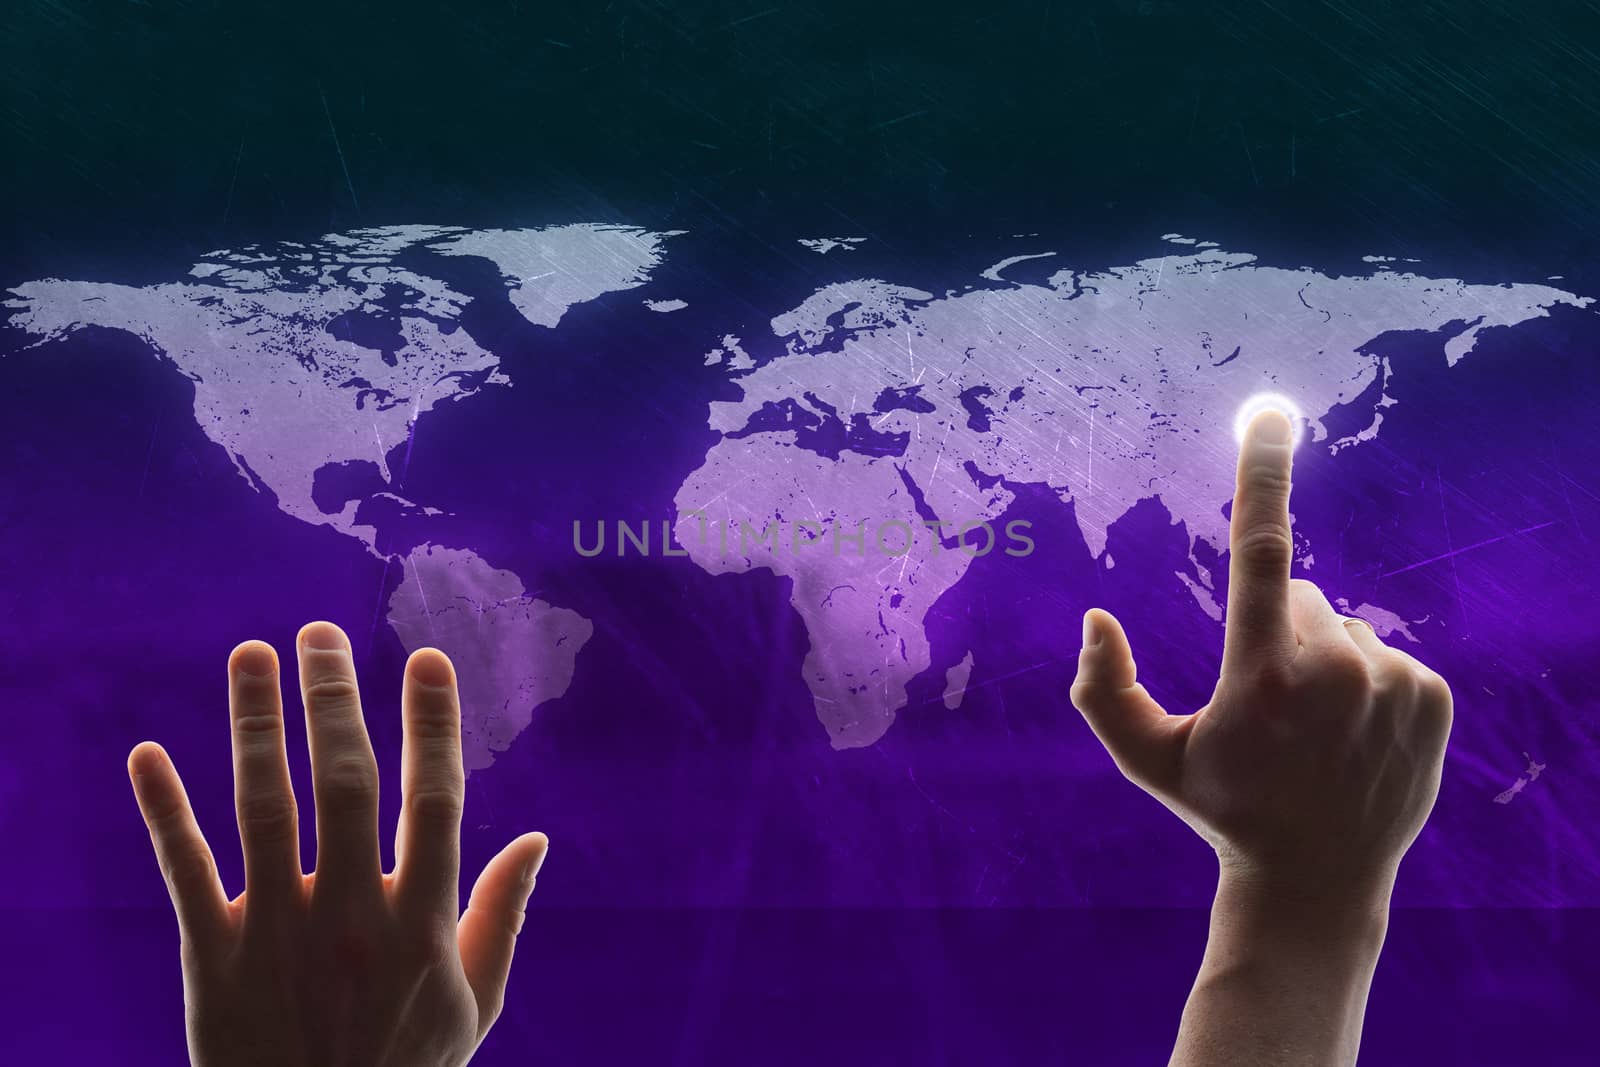 Hands touching holographic screen with world map, technology concept